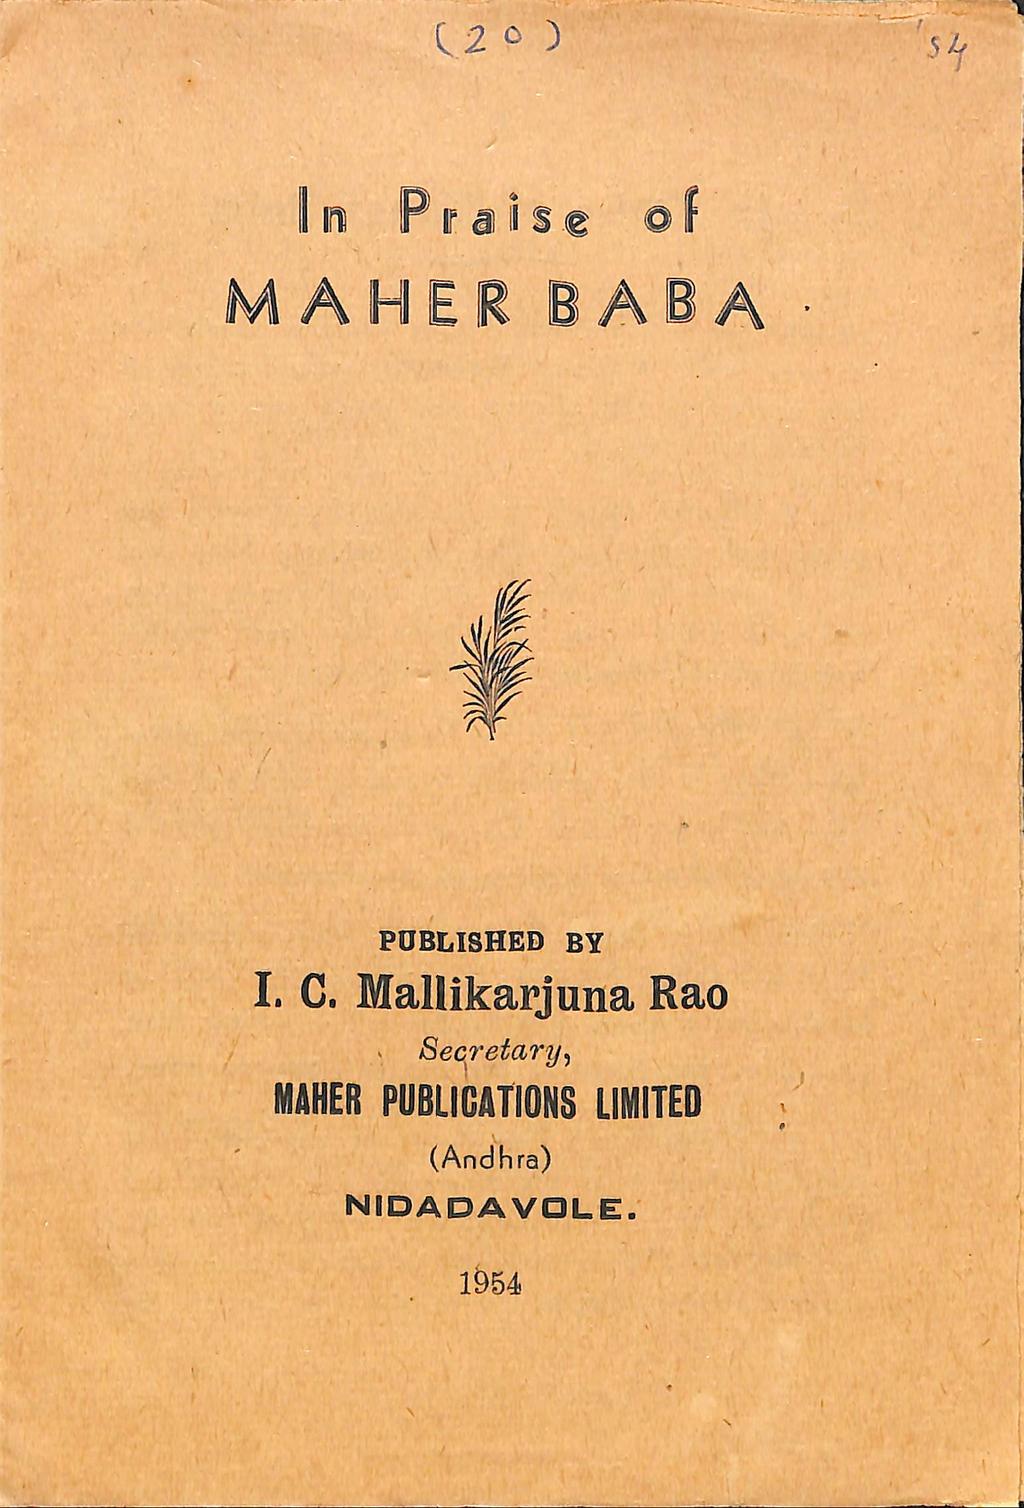 f MAHER BABA w' i> ' : '; ^ / PUBLISHED BY 1. C.